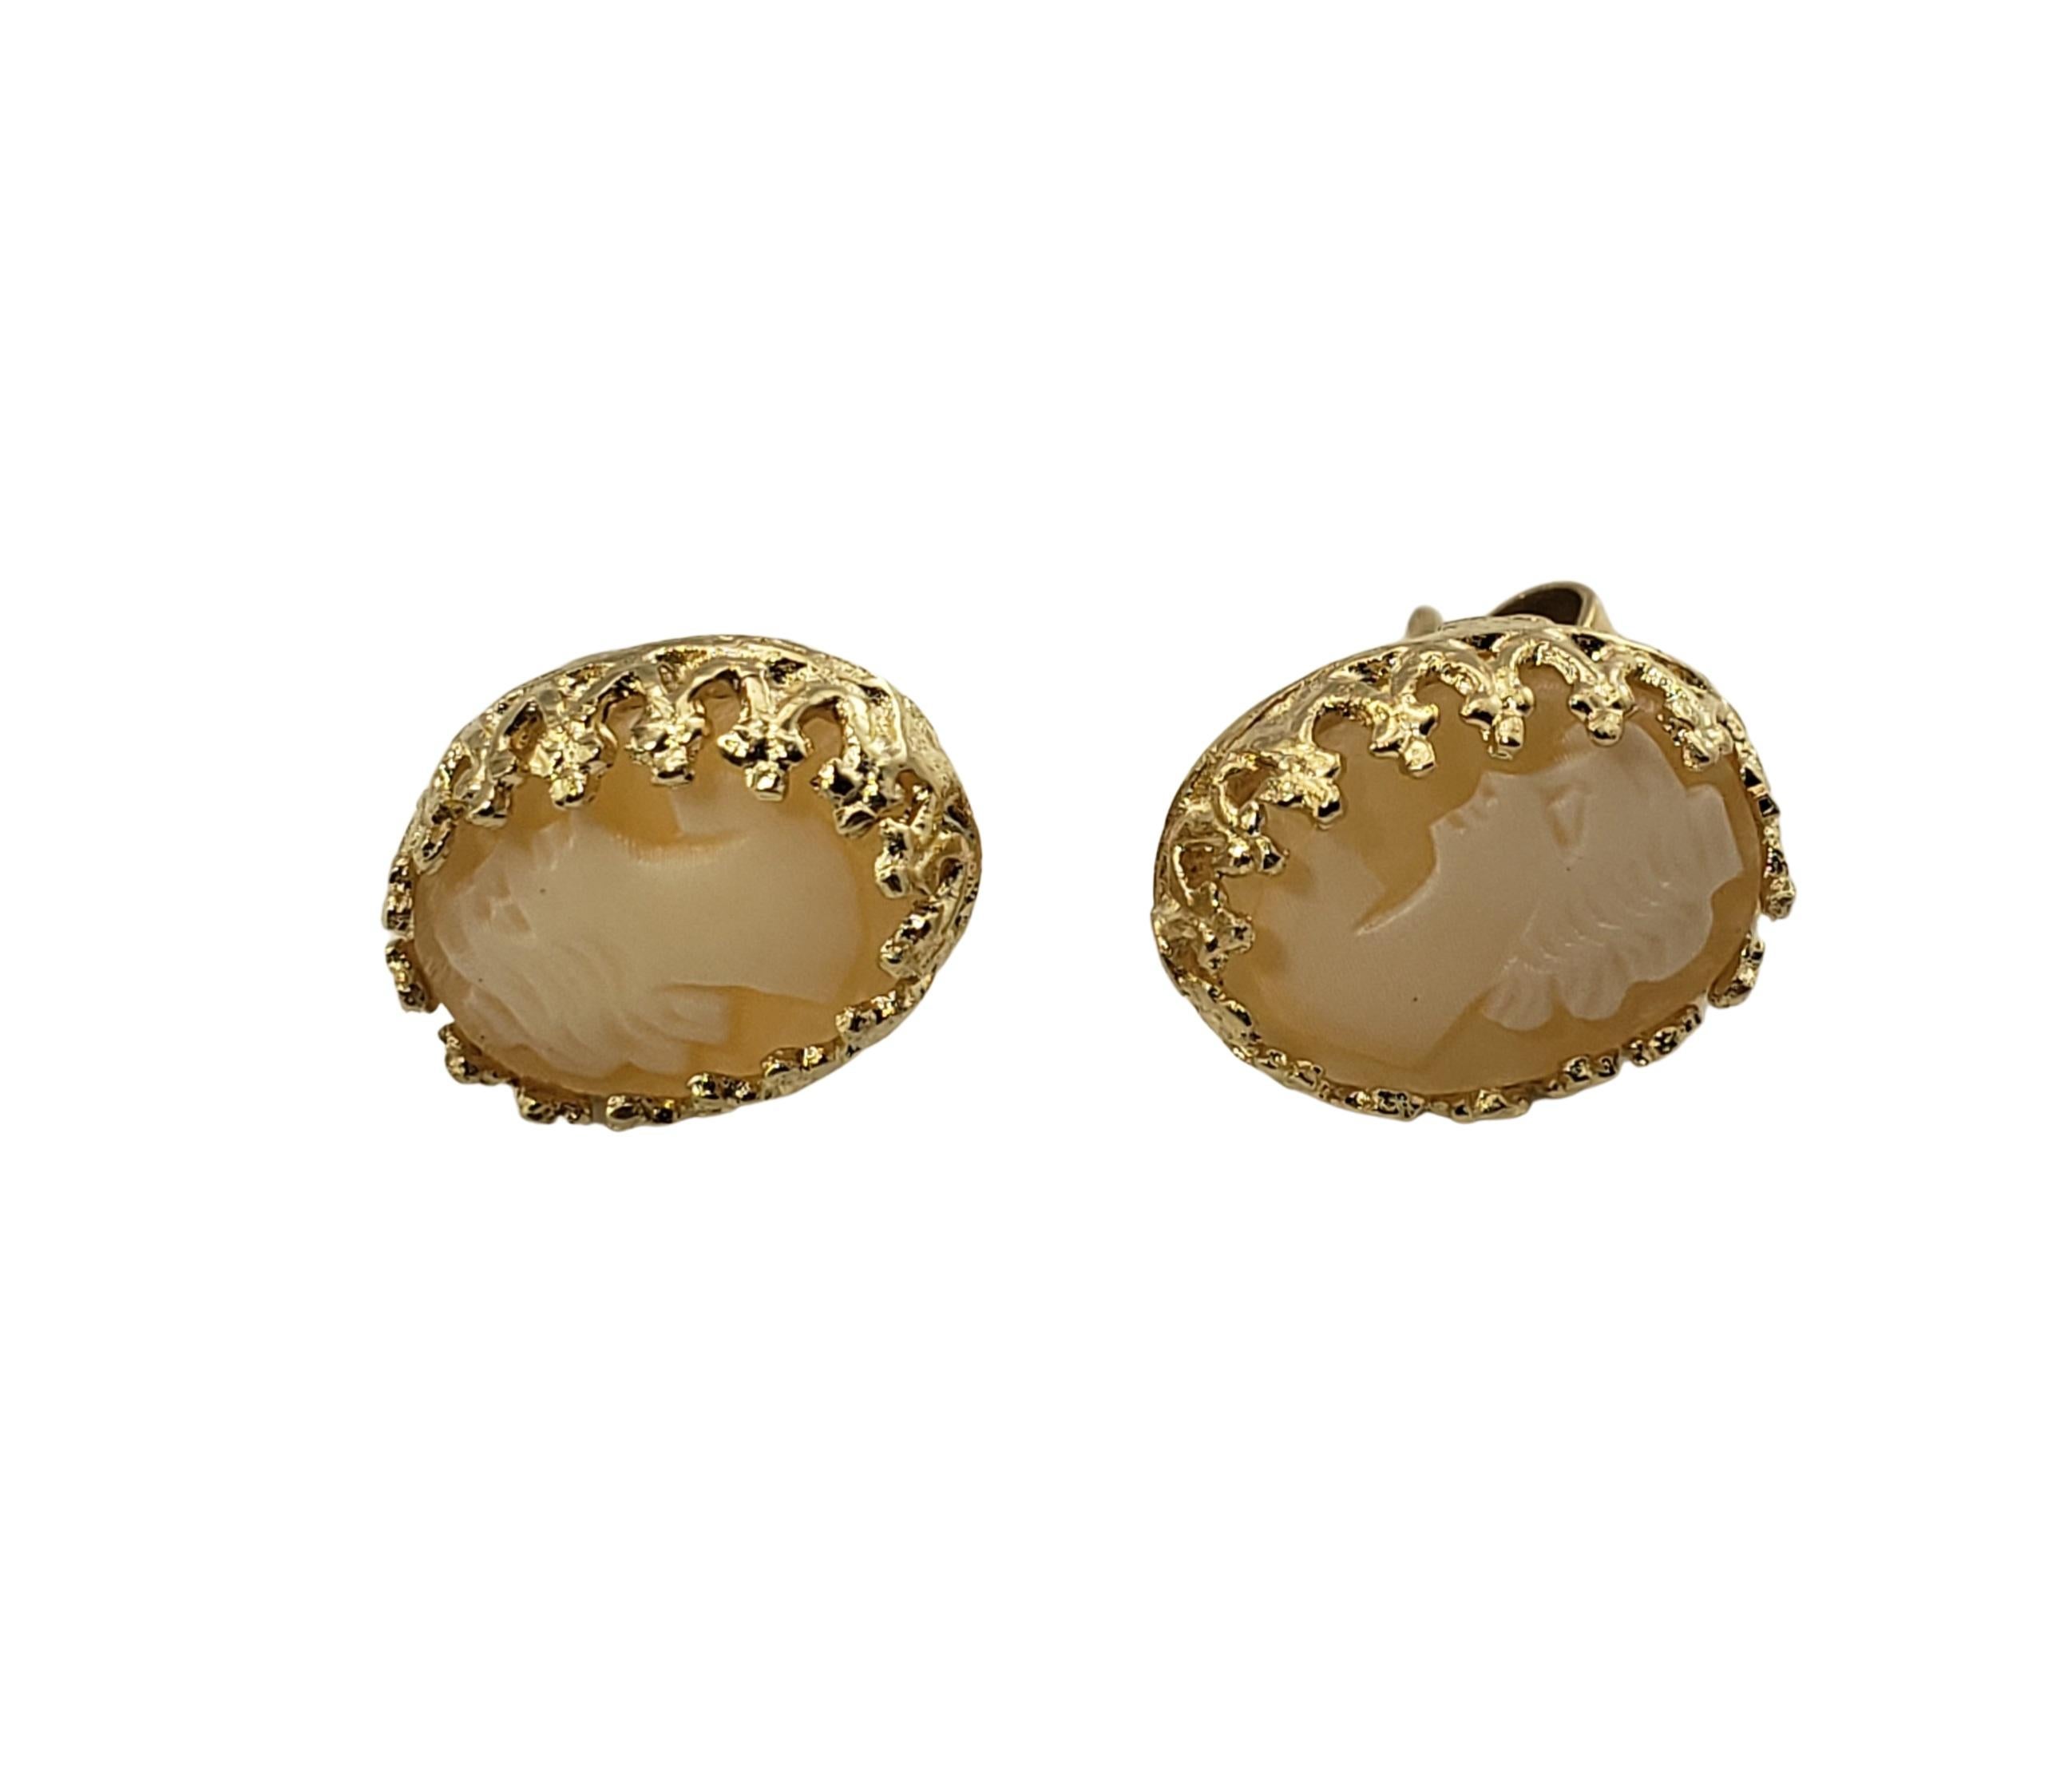 14 Karat Yellow Gold Cameo Earrings-

These elegant cameo earrings each features a lovely lady in profile set in beautifully detailed 14K yellow gold.

Size: 11 mm x 9 mm

Weight:  1.8 dwt. /  2.9 gr.

Tested for 14K gold.

Very good condition,